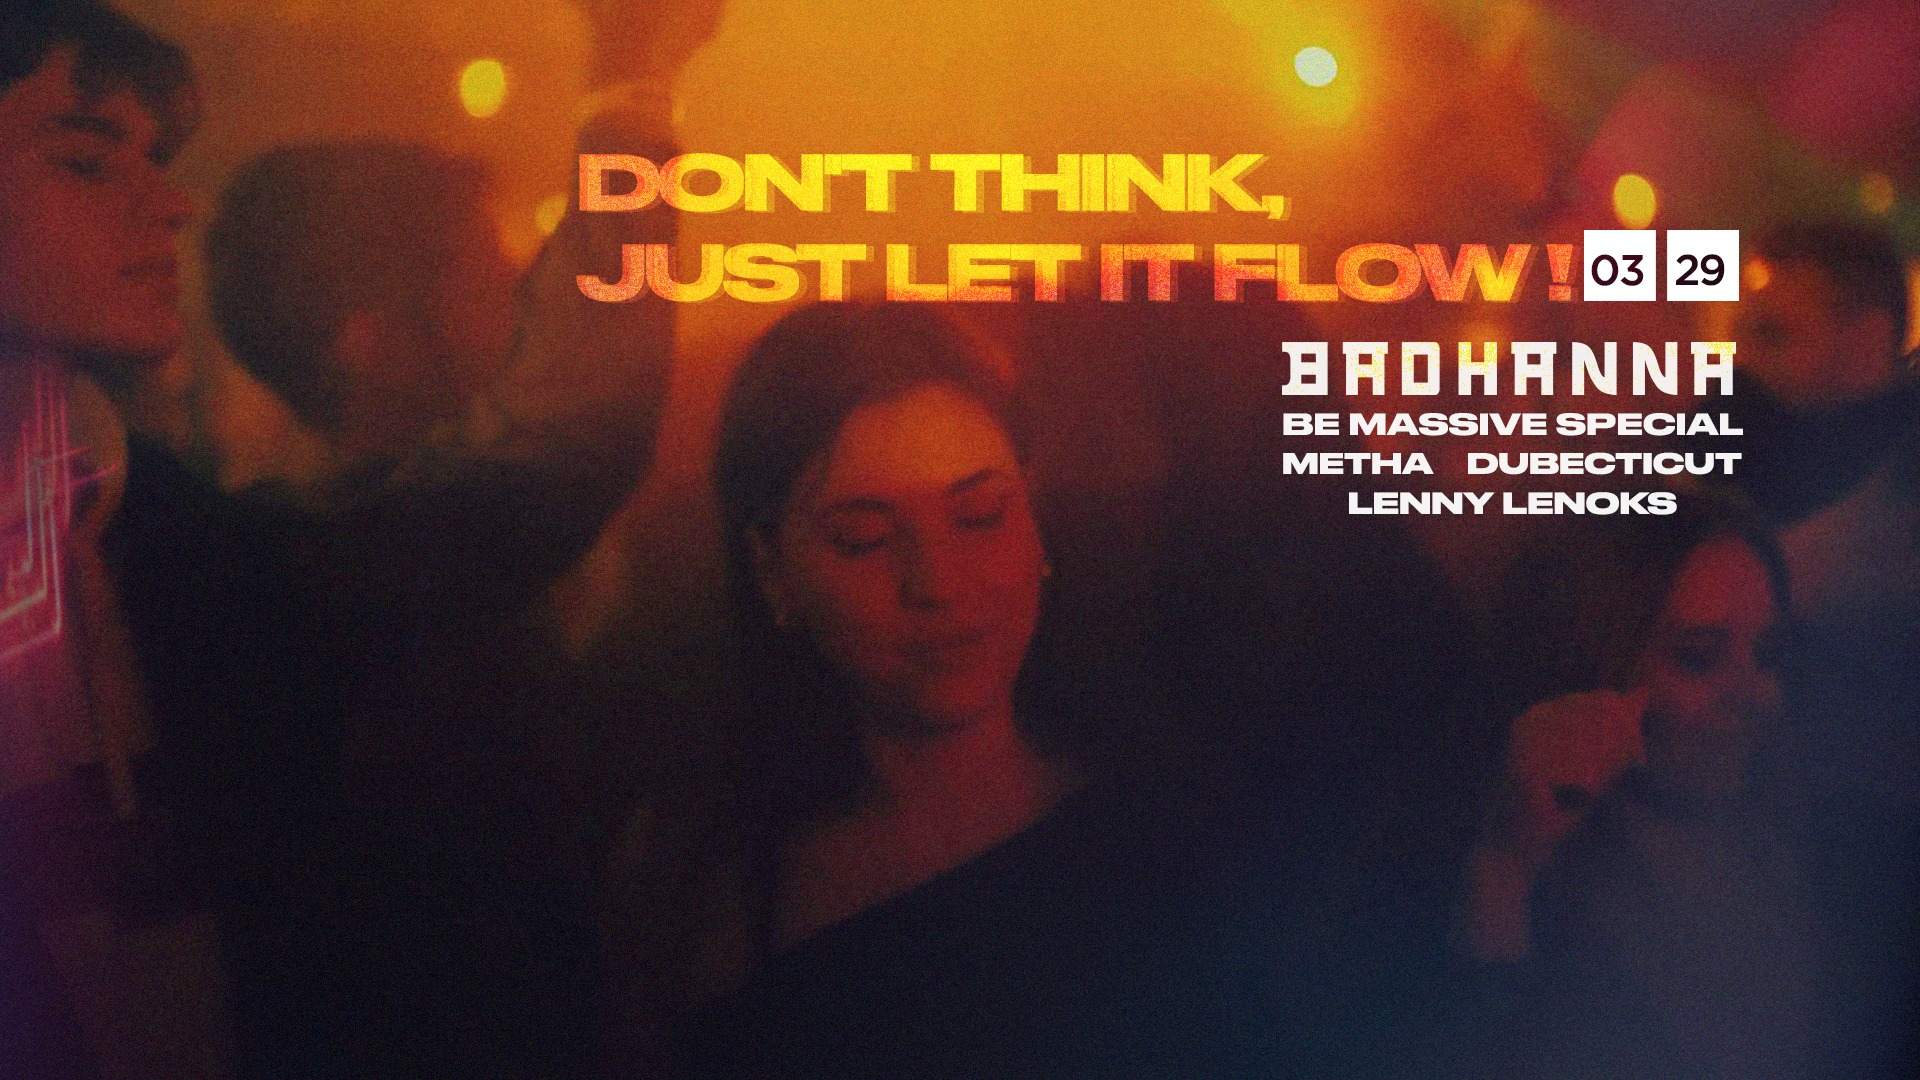 CLUB BADHANNA x Be Massive Special - Don't Think, Just Let It Flow - フライヤー表